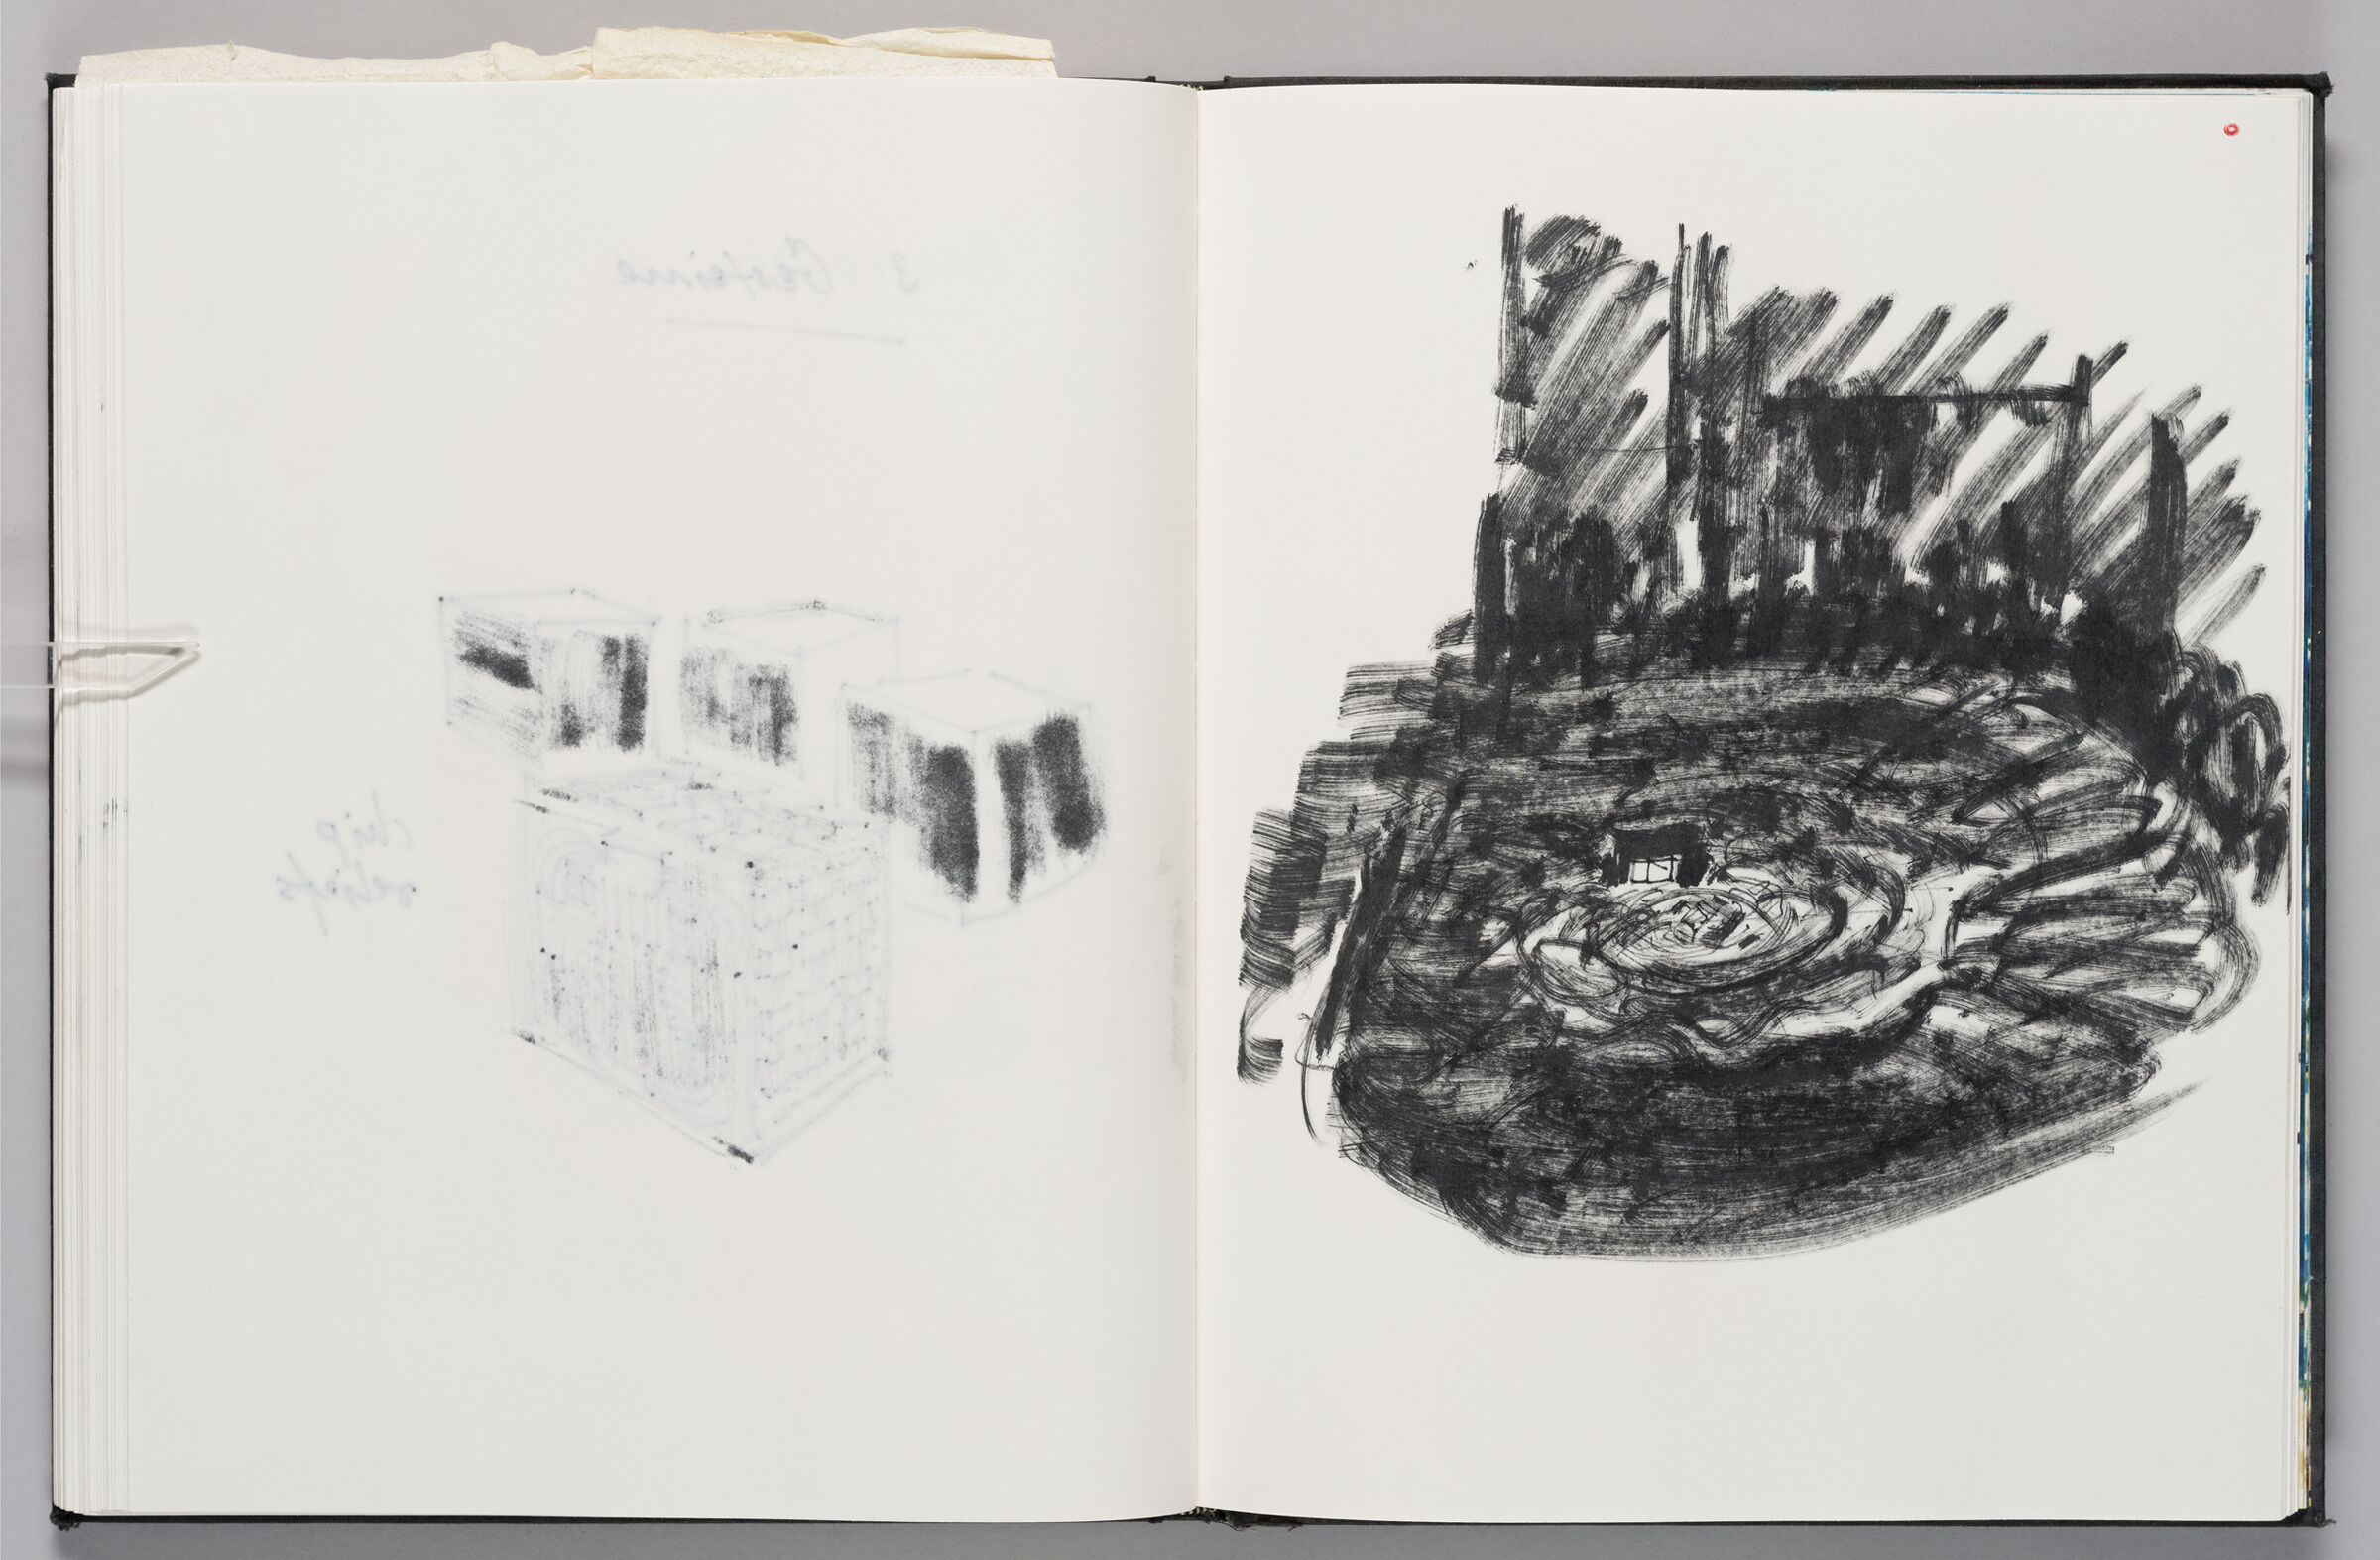 Untitled (Bleed-Through Of Previous Page, Left Page); Untitled (Media Park Fountain, Right Page)